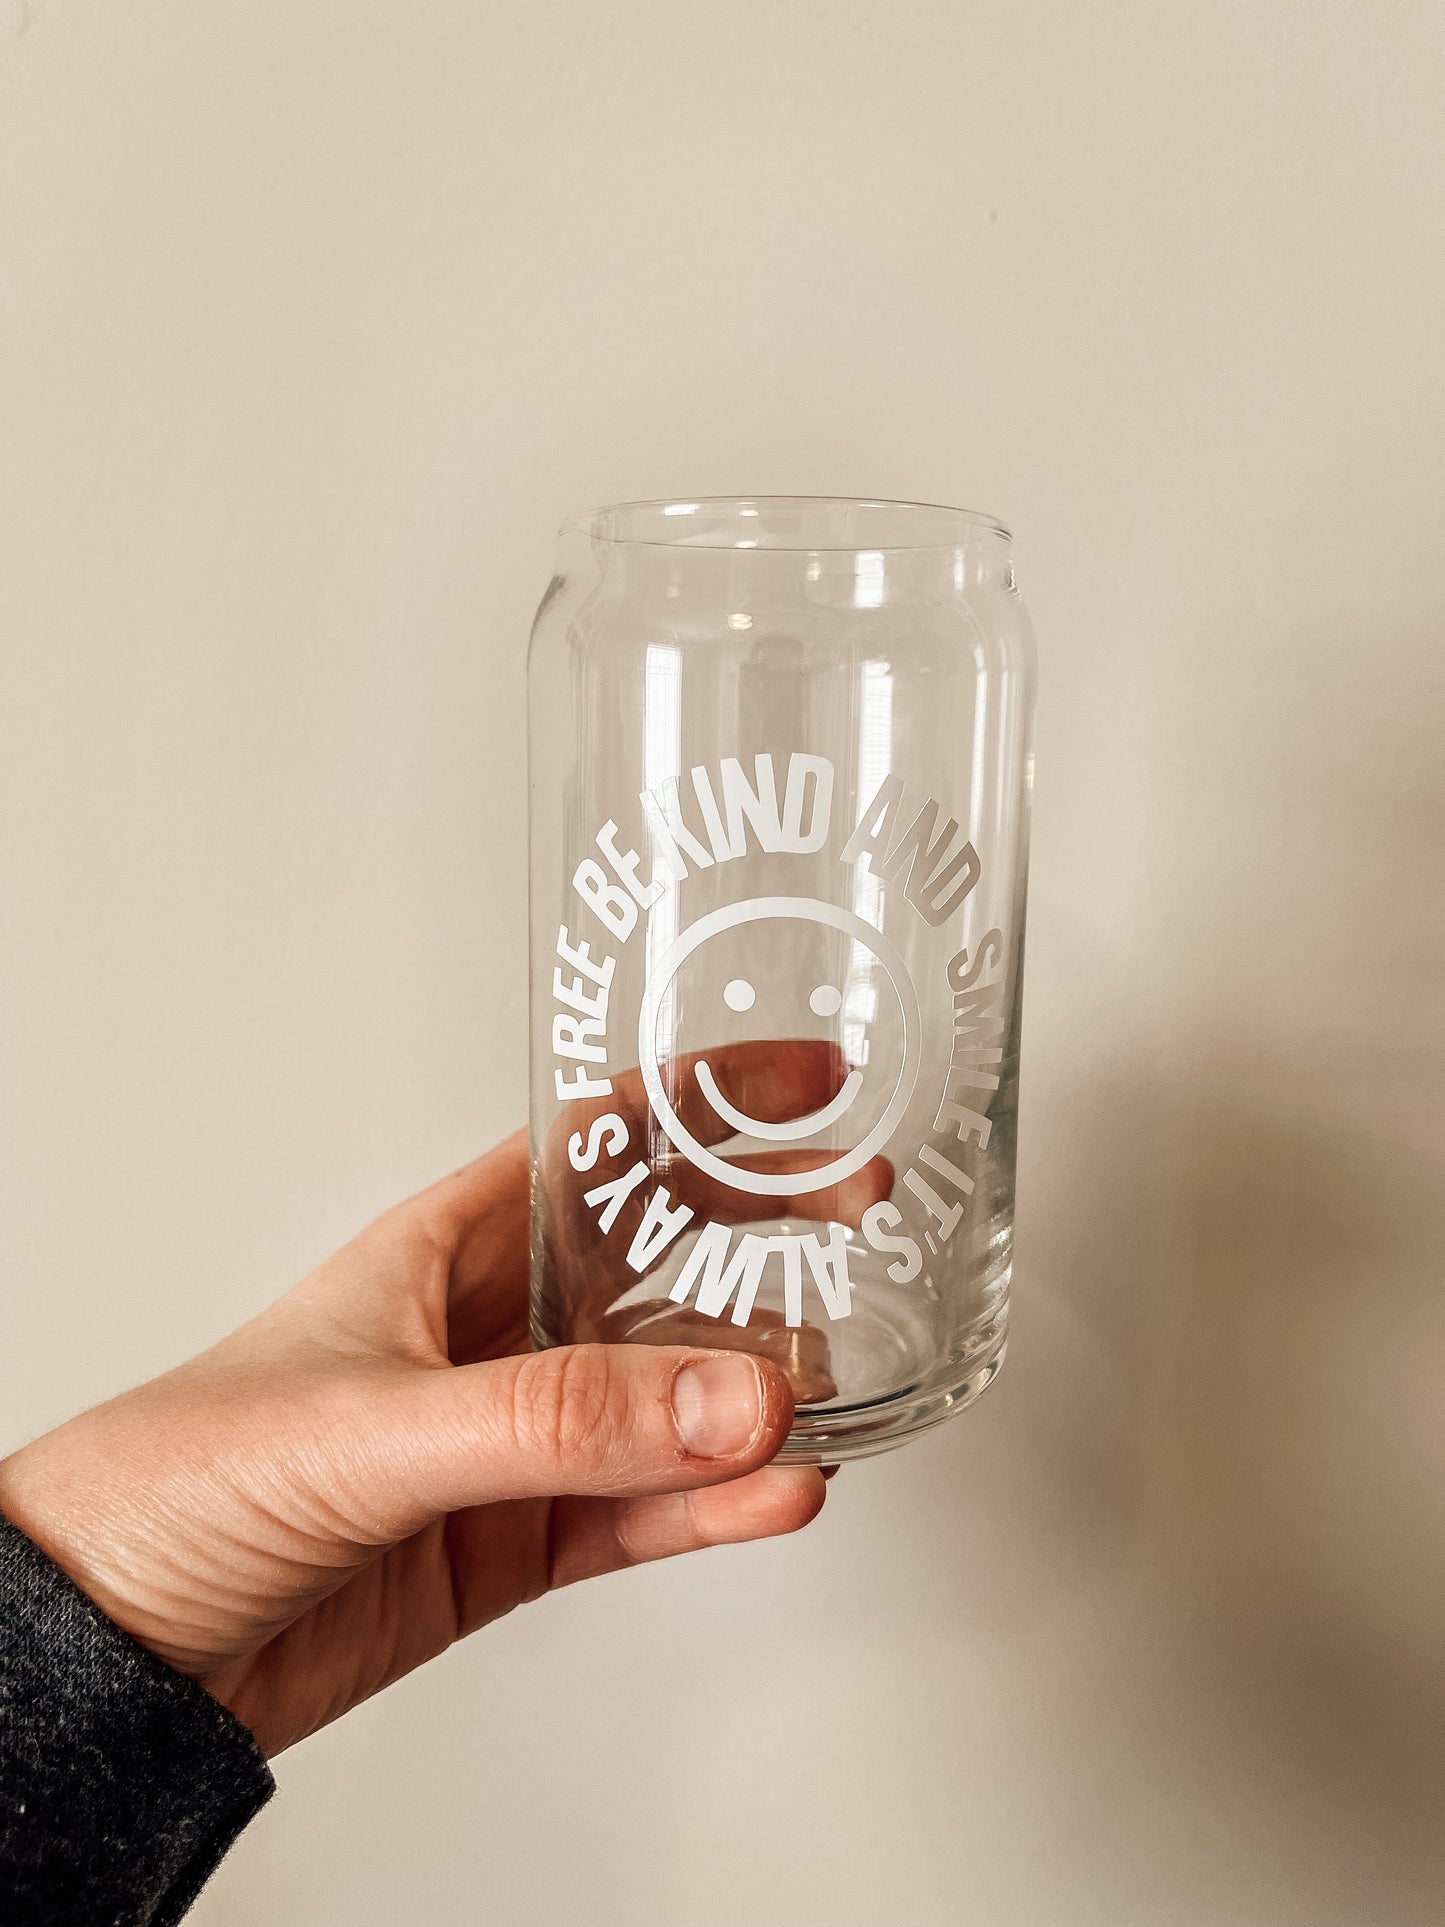 "Be Kind and Smile" Glass Can Cup